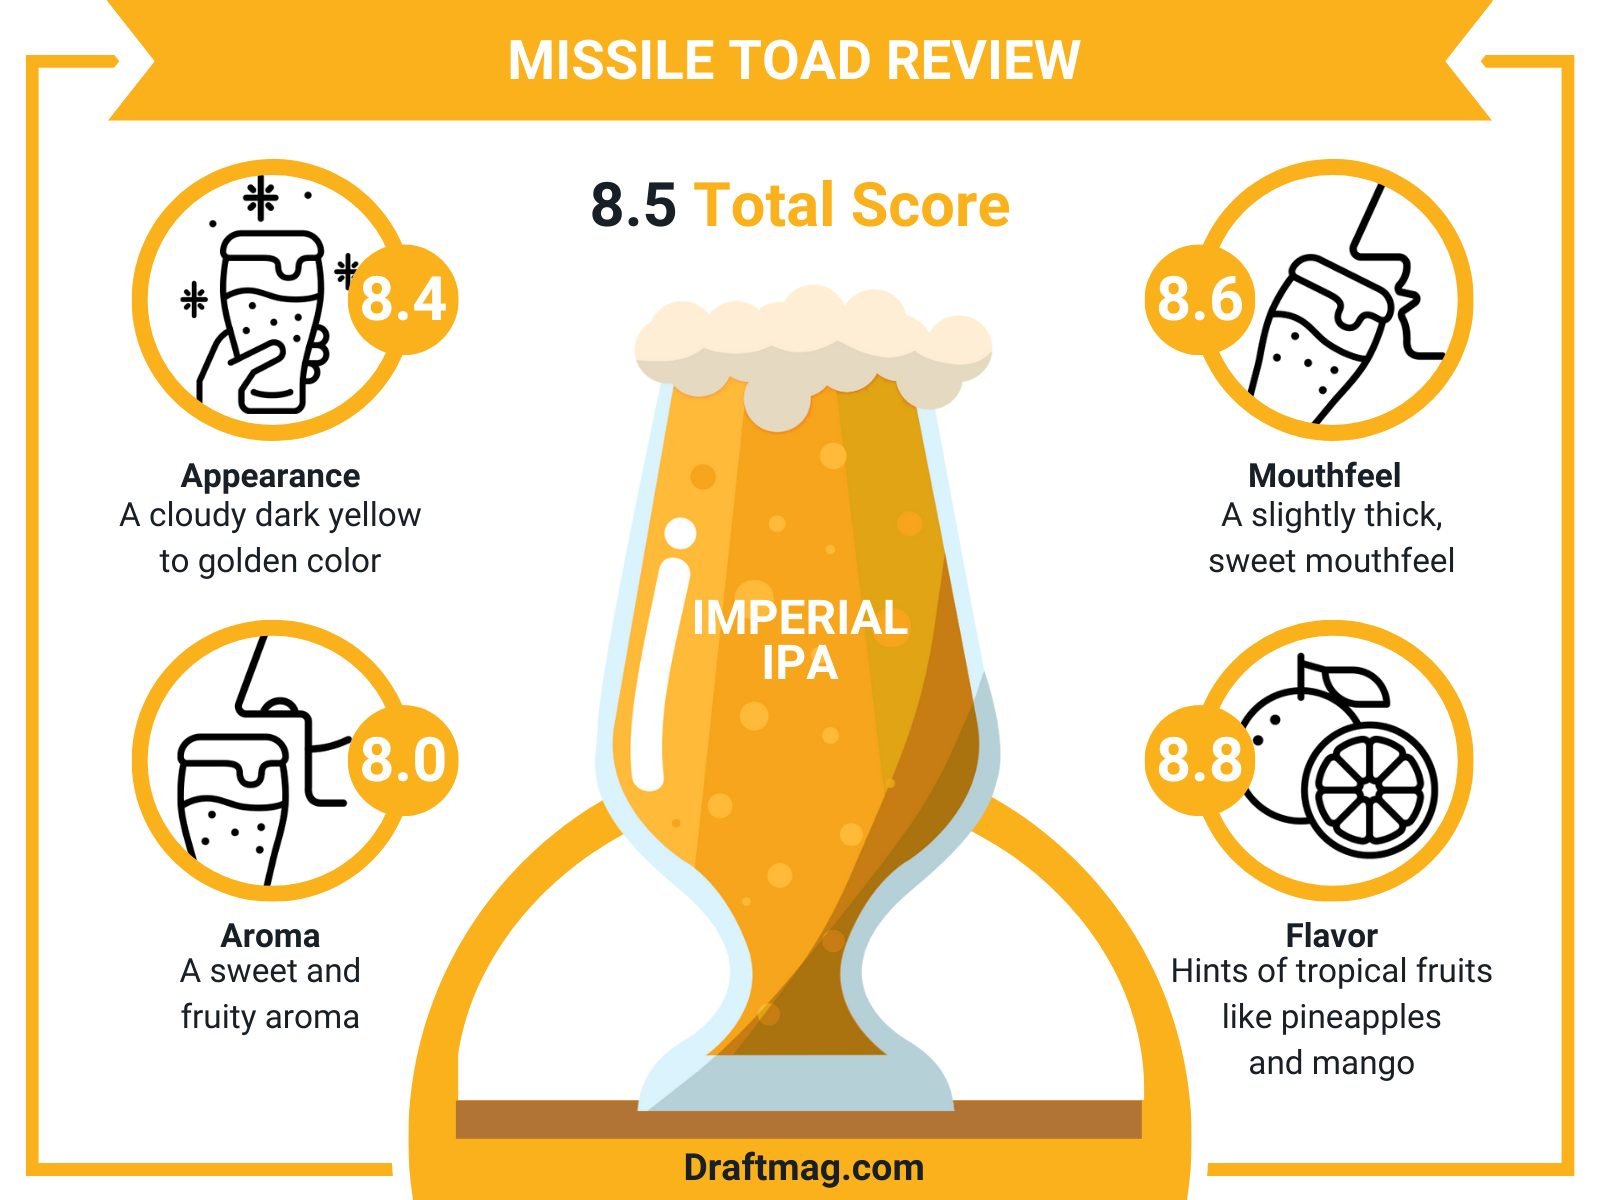 Missile Toad Review Infographic